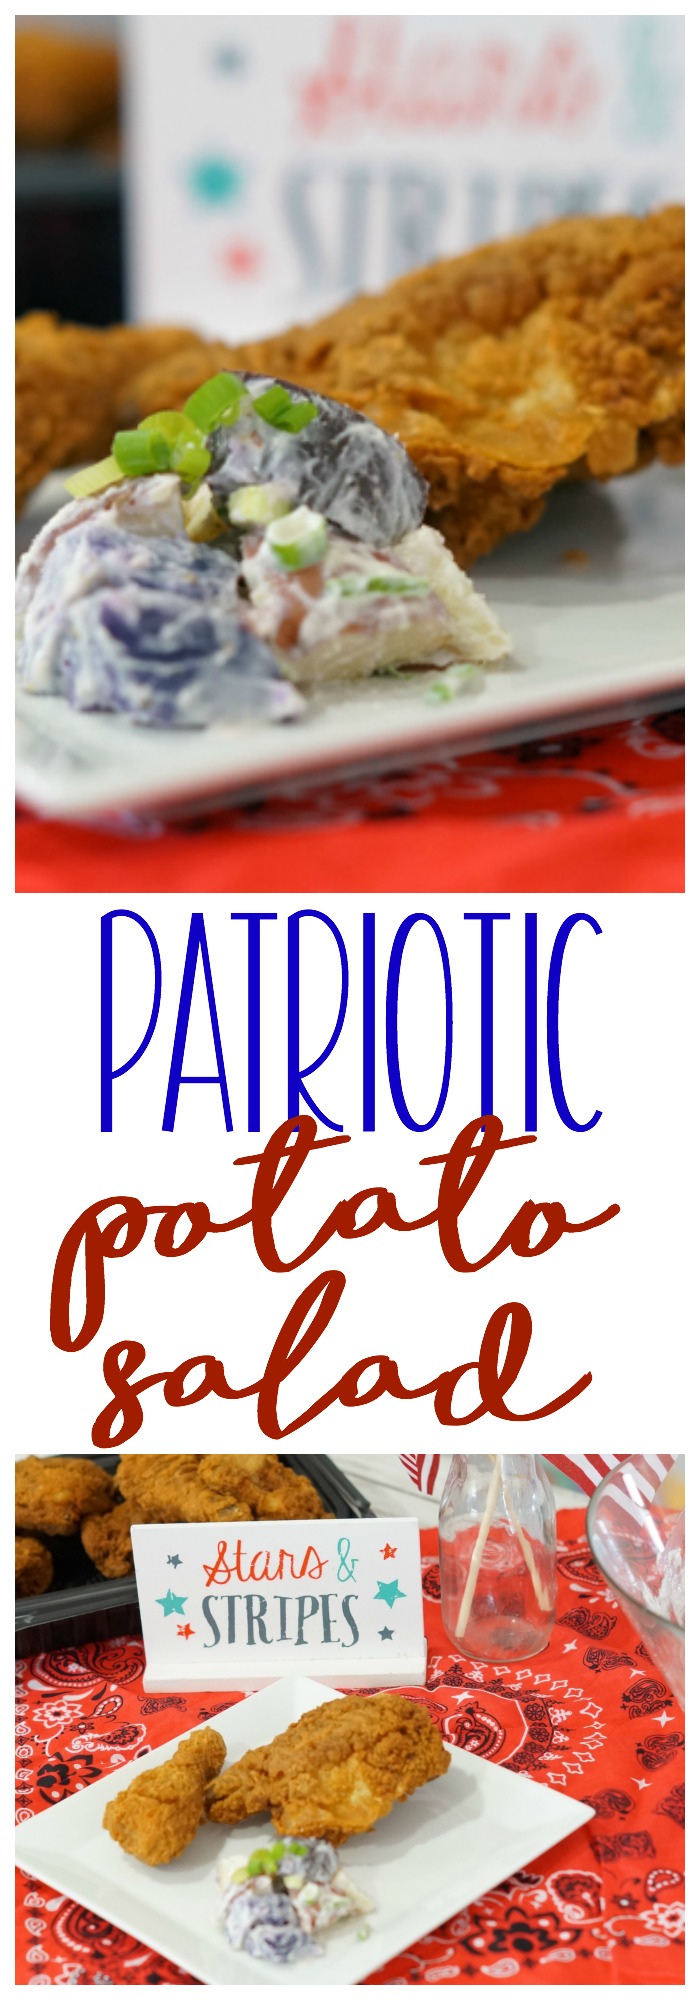 This easy potato salad is perfect for Fourth of July cookouts! Grab your red, white, and blue potatoes and let's get cooking! AD